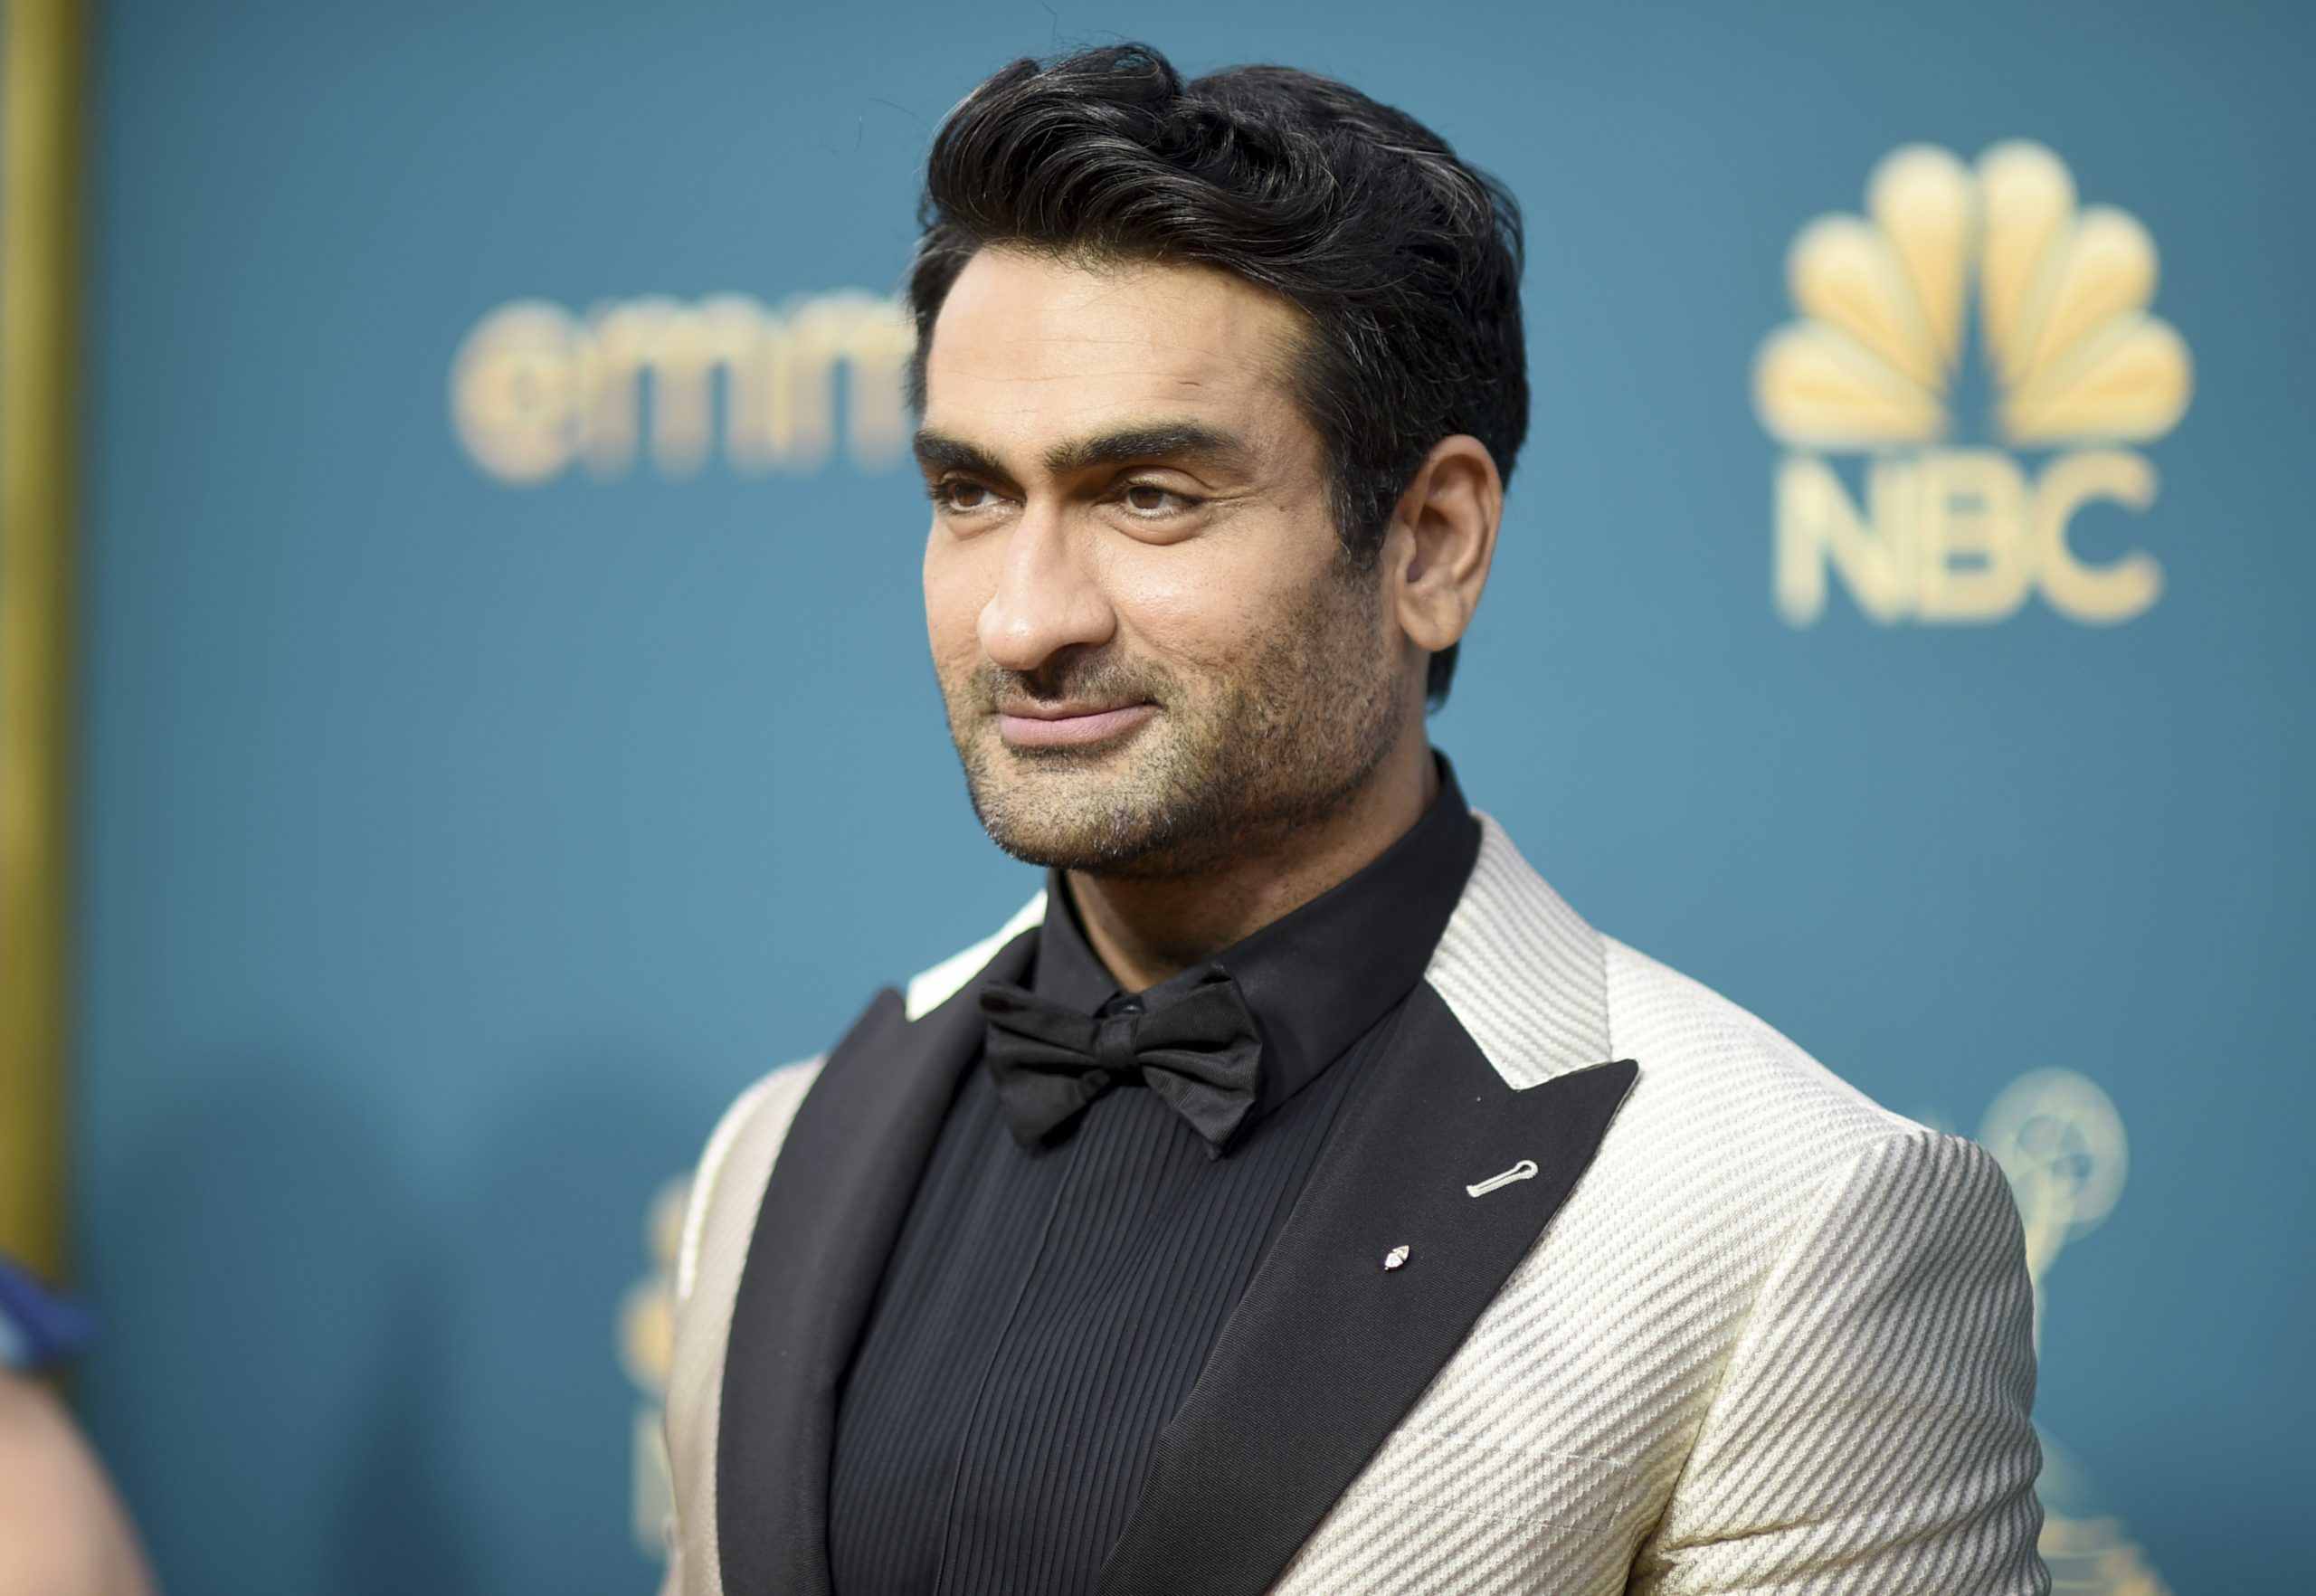 Kumail Nanjiani teases wild true-crime story 'Welcome to Chippendales ...